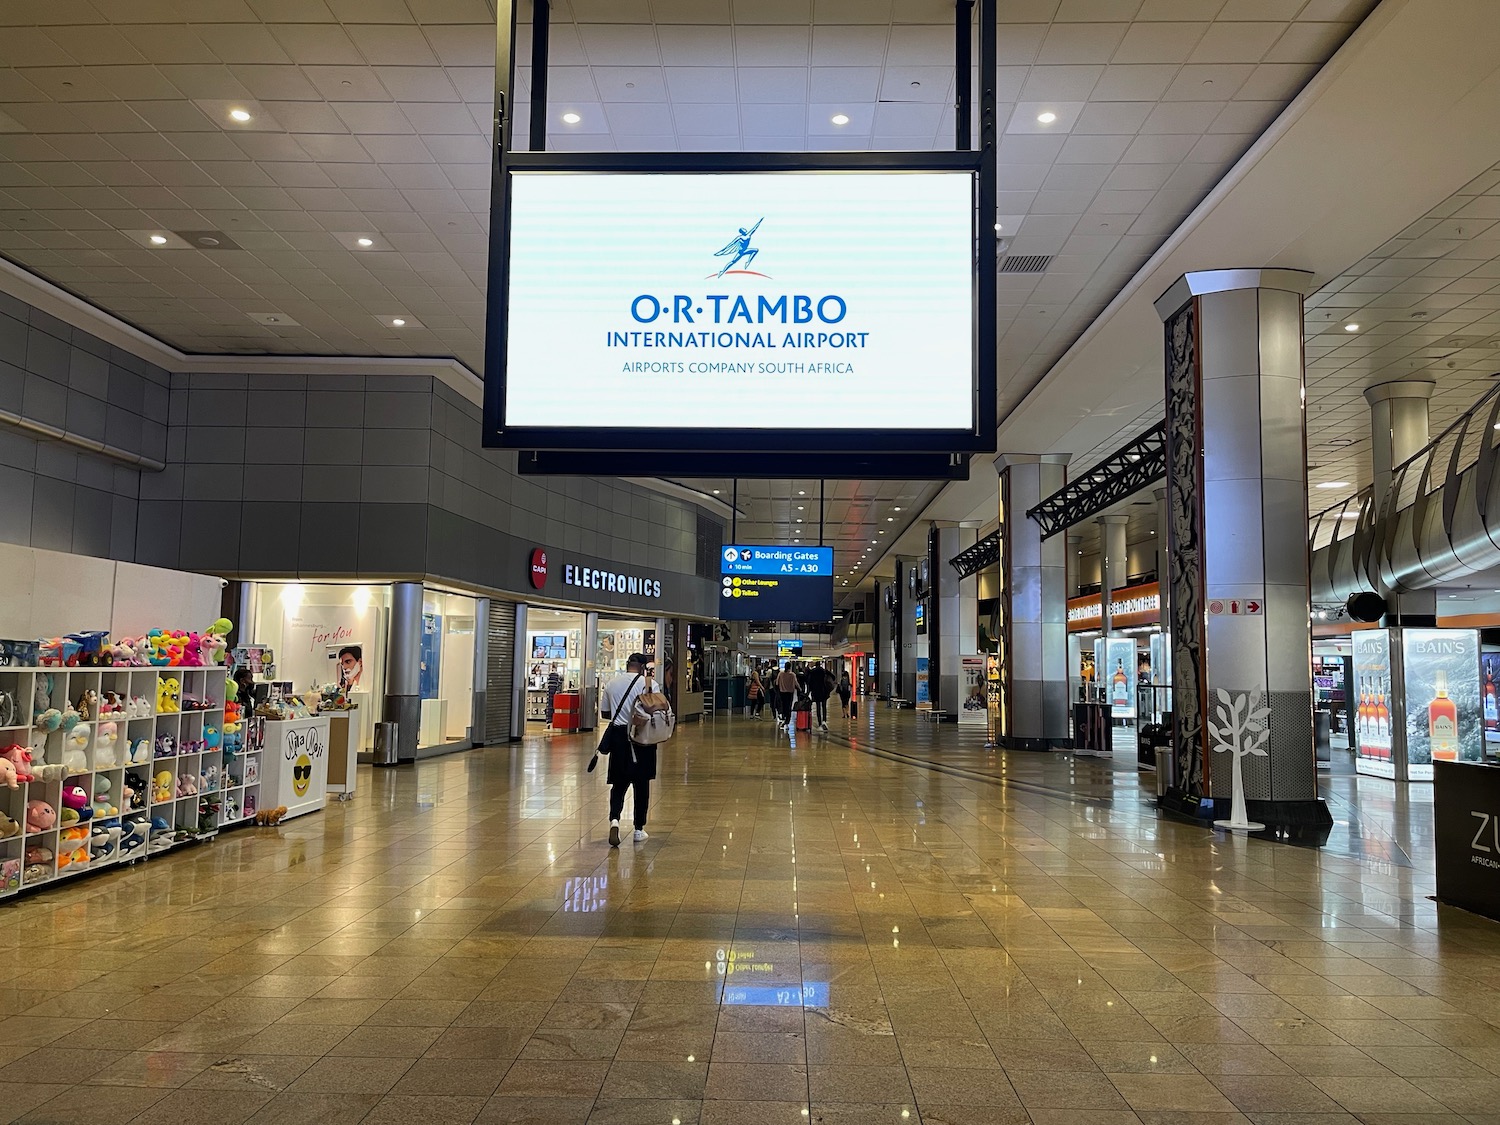 a large rectangular sign in a large airport